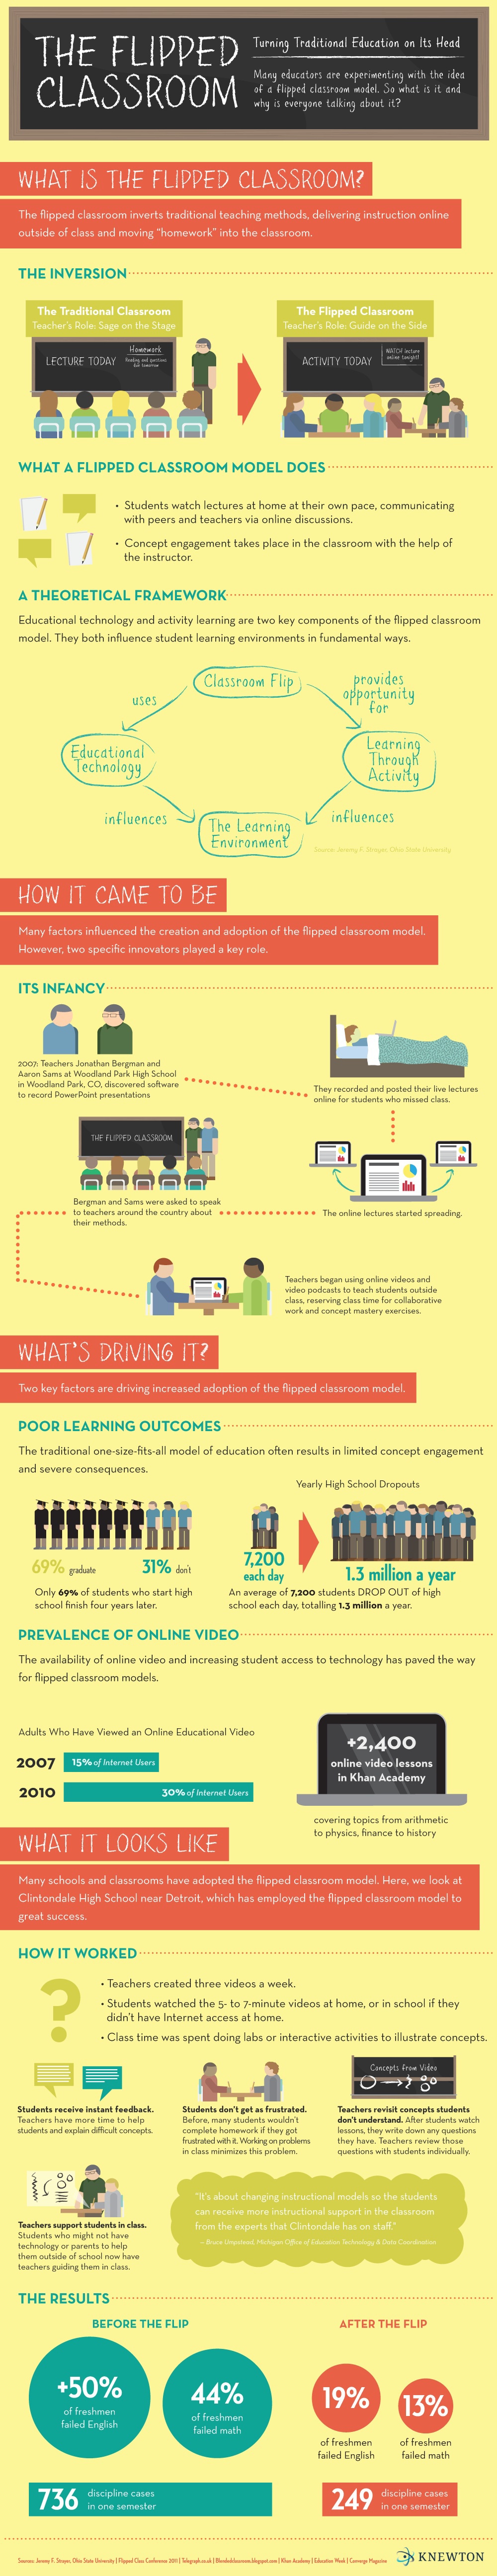 Infographic depicting the flipped classroom.